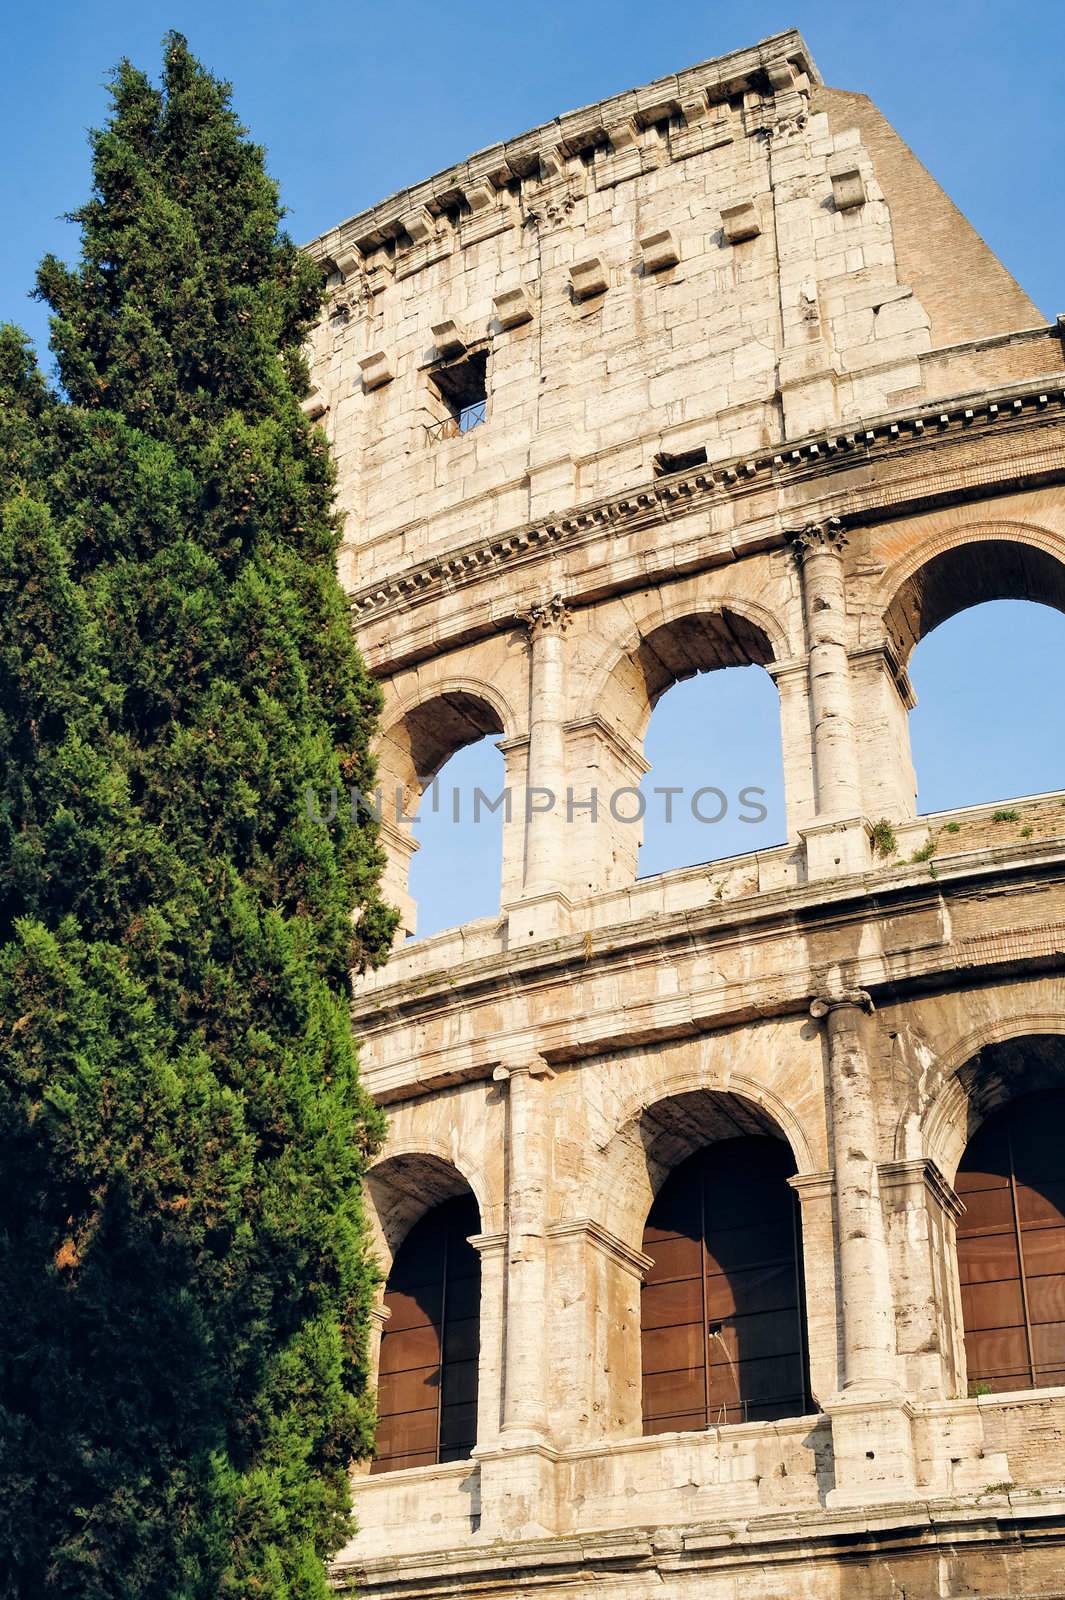 View of the exterior of the Colosseum in Rome. Italy